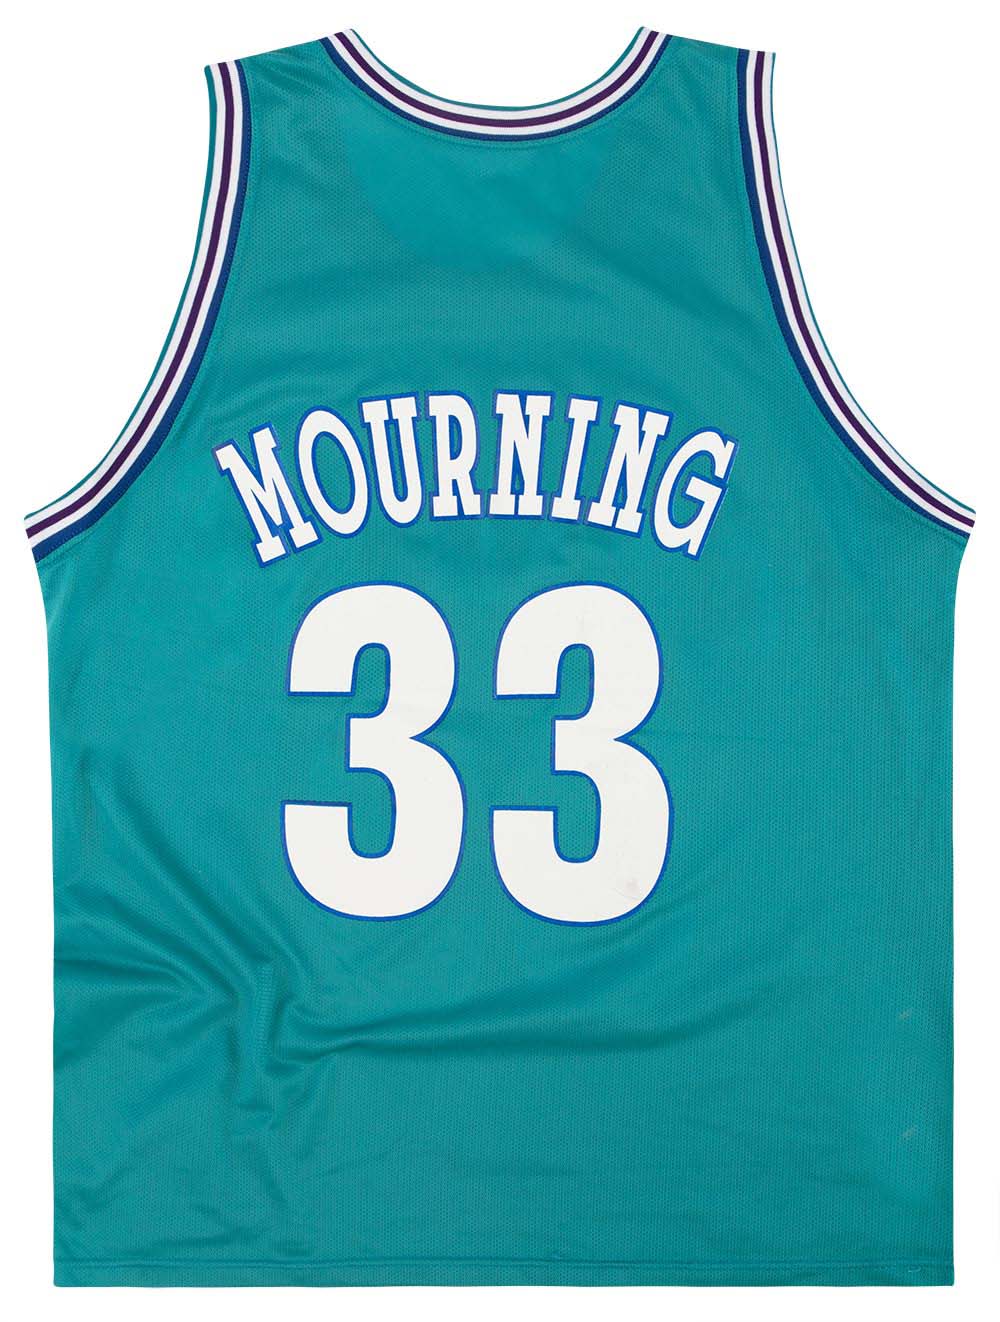 1992-95 CHARLOTTE HORNETS MOURNING #33 CHAMPION JERSEY (AWAY) XL - Classic  American Sports